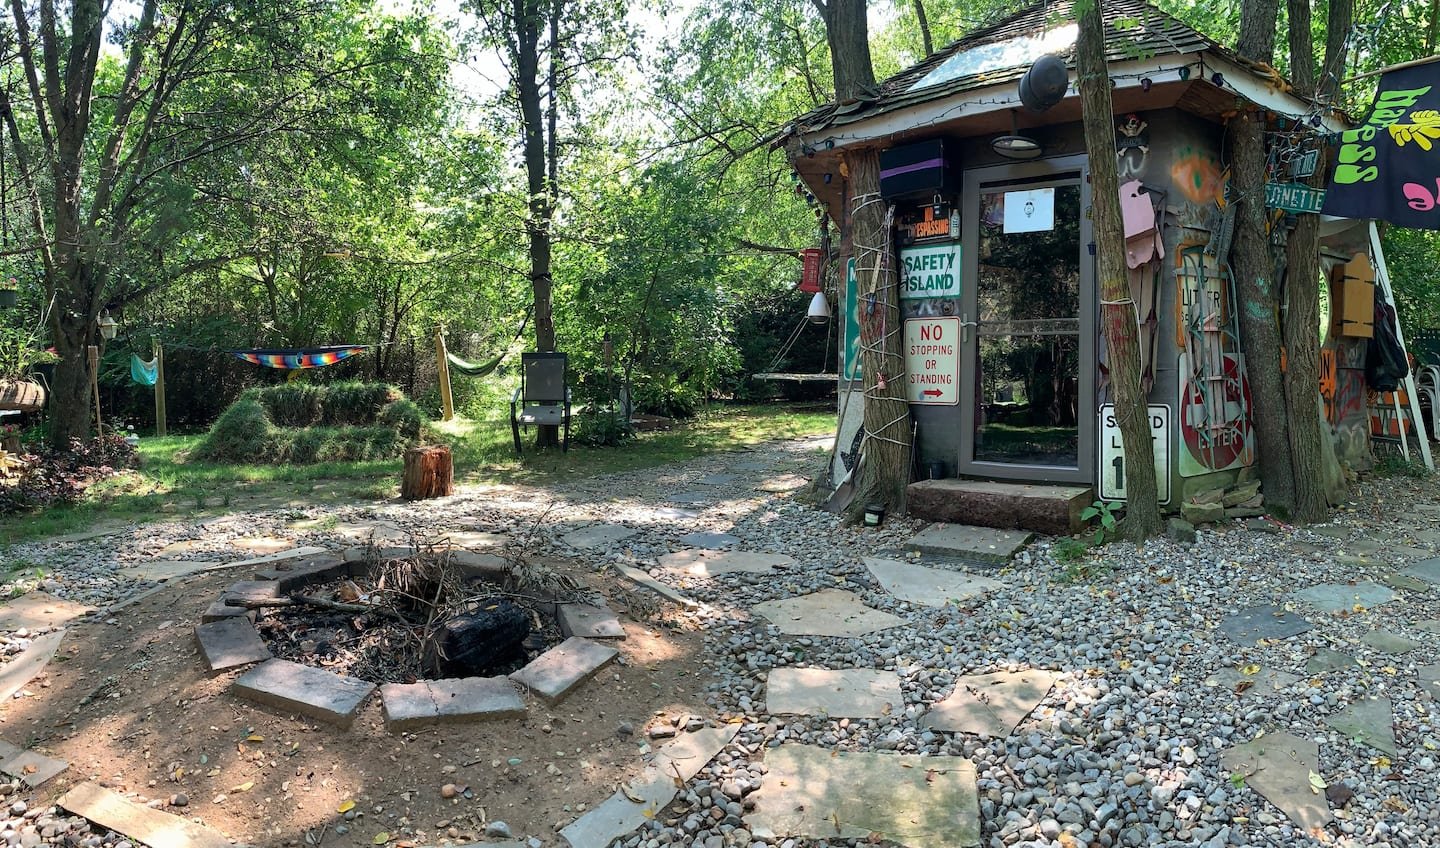  Expect the unexpected at this  unique hut getaway  with a heated outdoor shower, free-range chicken coop, and firepit.    Typical starting price: $176    Location: East Windsor, New Jersey     Sleeps: 3 guests    Rating: 4.99    Pet Fee: $20 per pet